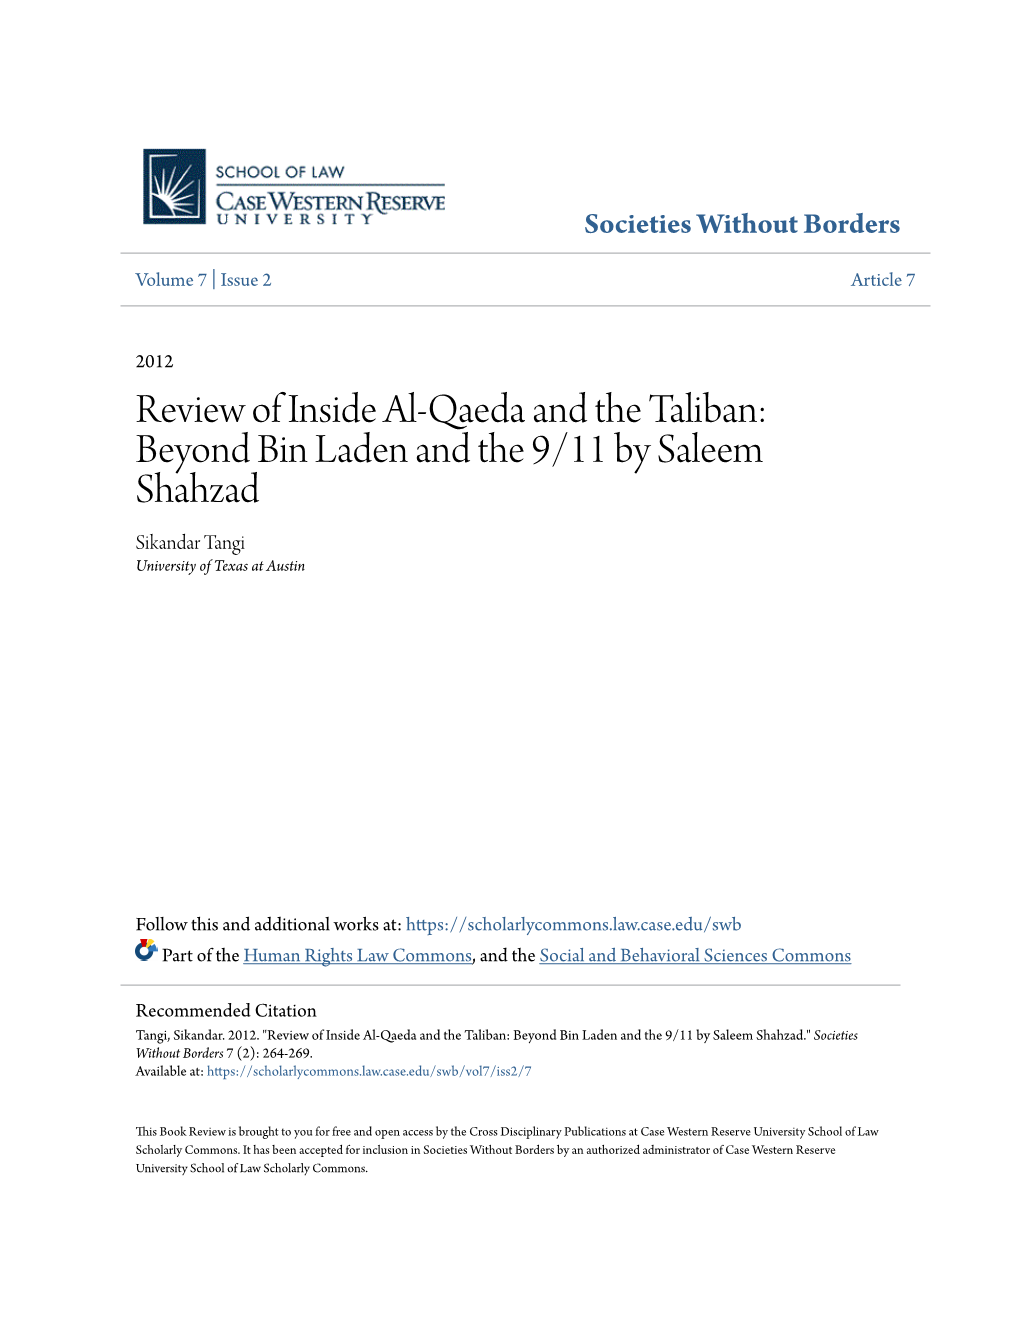 Review of Inside Al-Qaeda and the Taliban: Beyond Bin Laden and the 9/11 by Saleem Shahzad Sikandar Tangi University of Texas at Austin